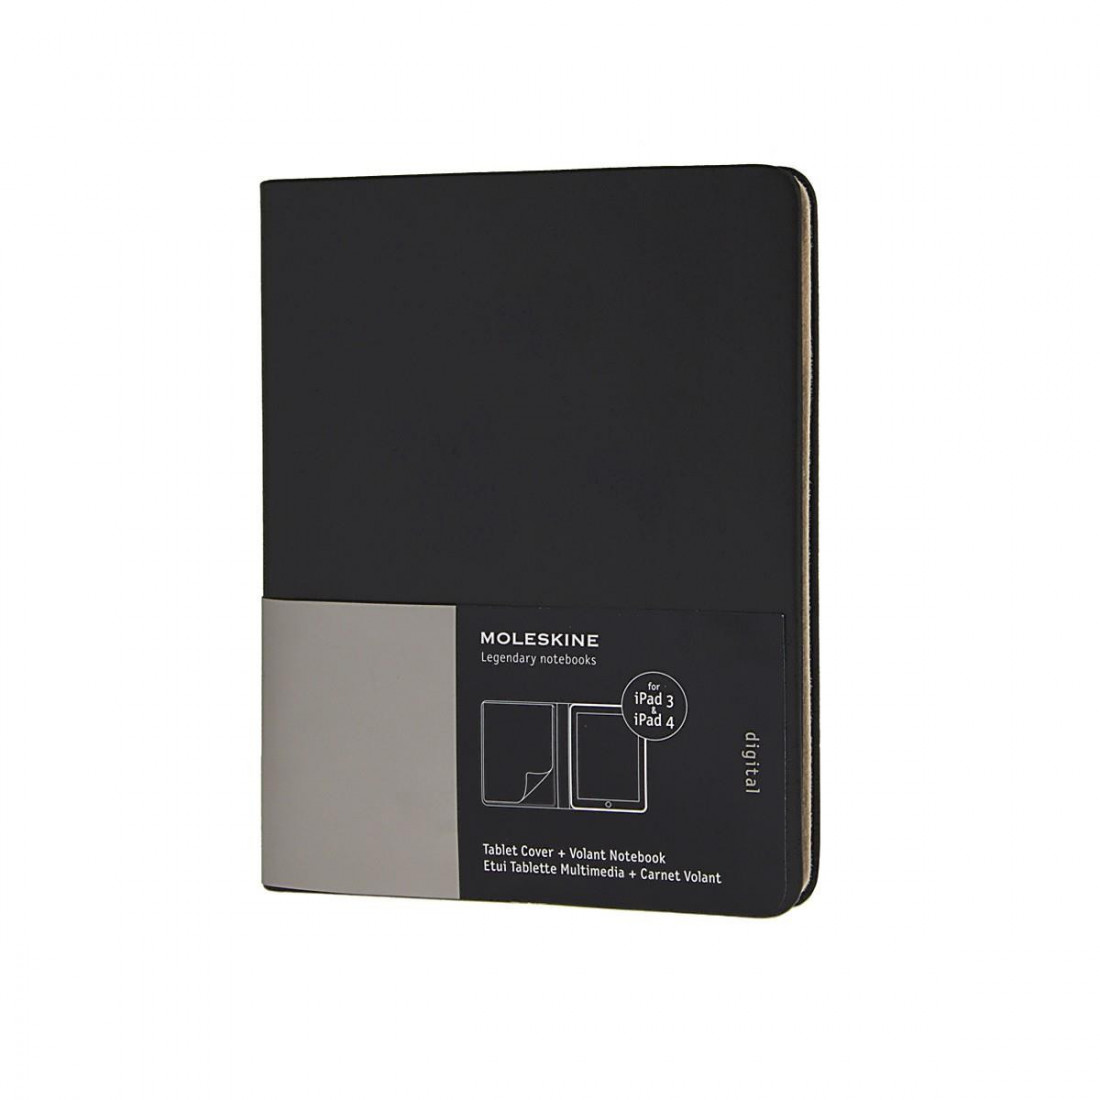 TABLET SLIM COVER BLACK FOR IPAD 3&4 WITH NOTEBOOK MOLESKINE